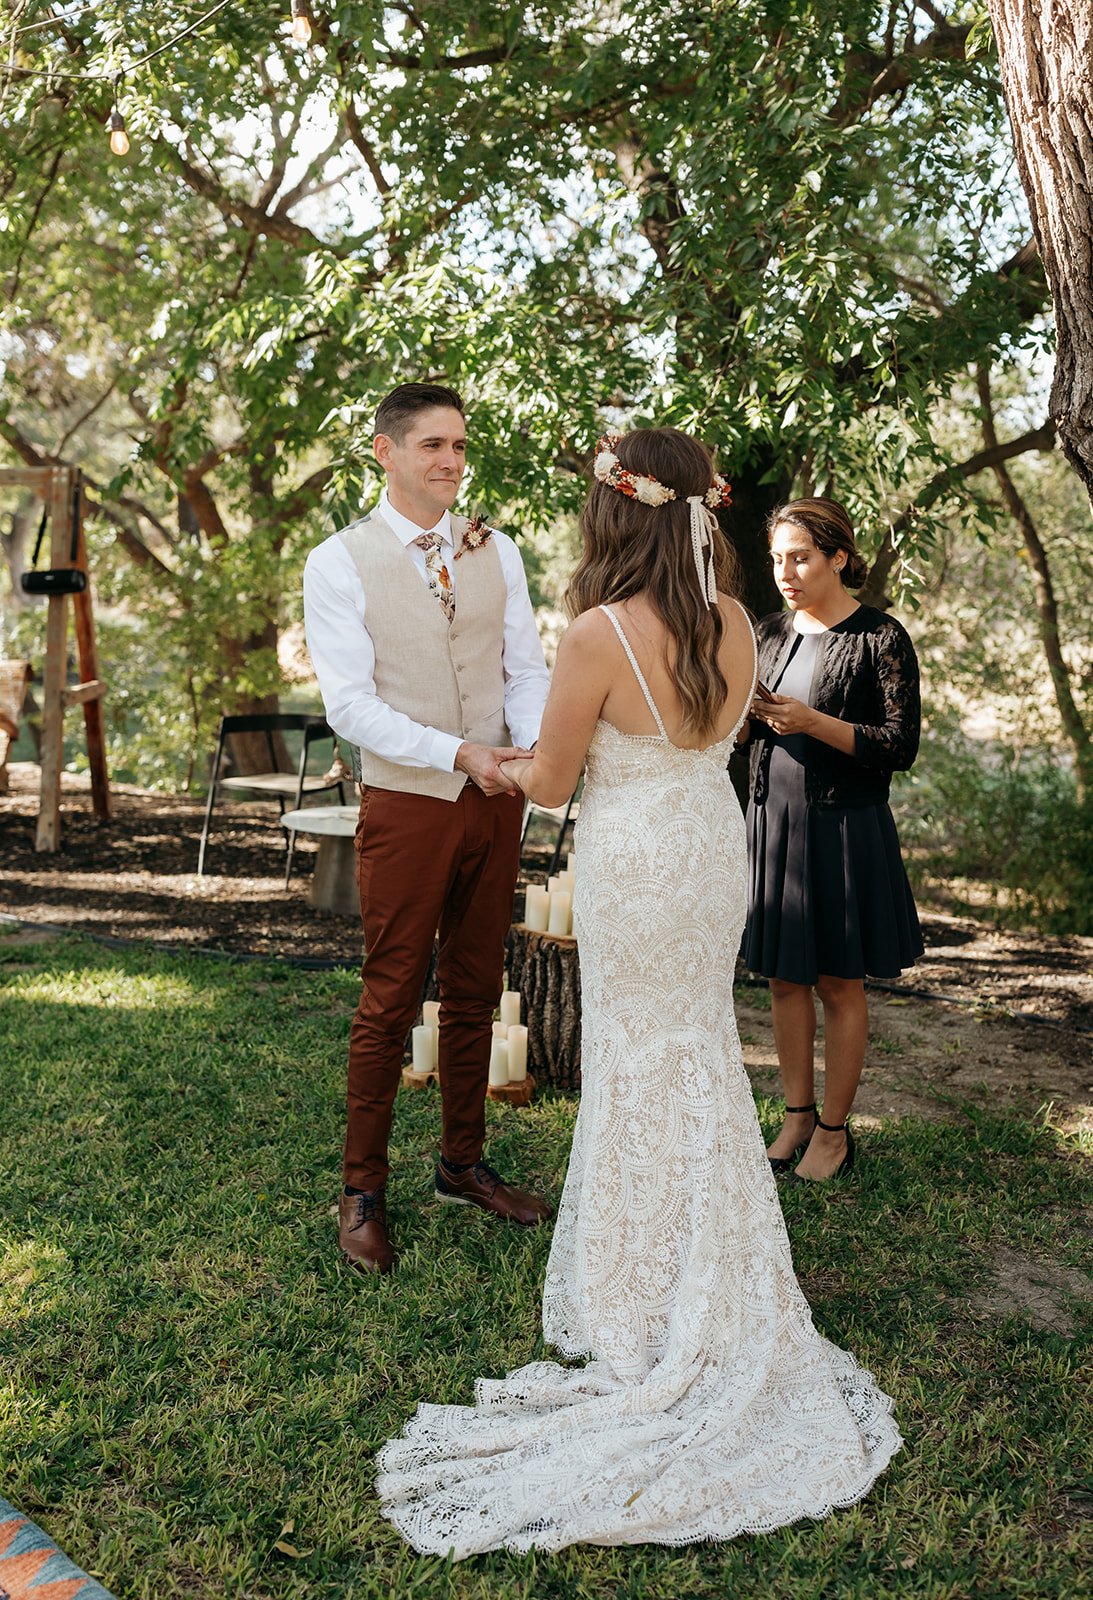 James looks lovingly at Leah during the outdoor wedding ceremony